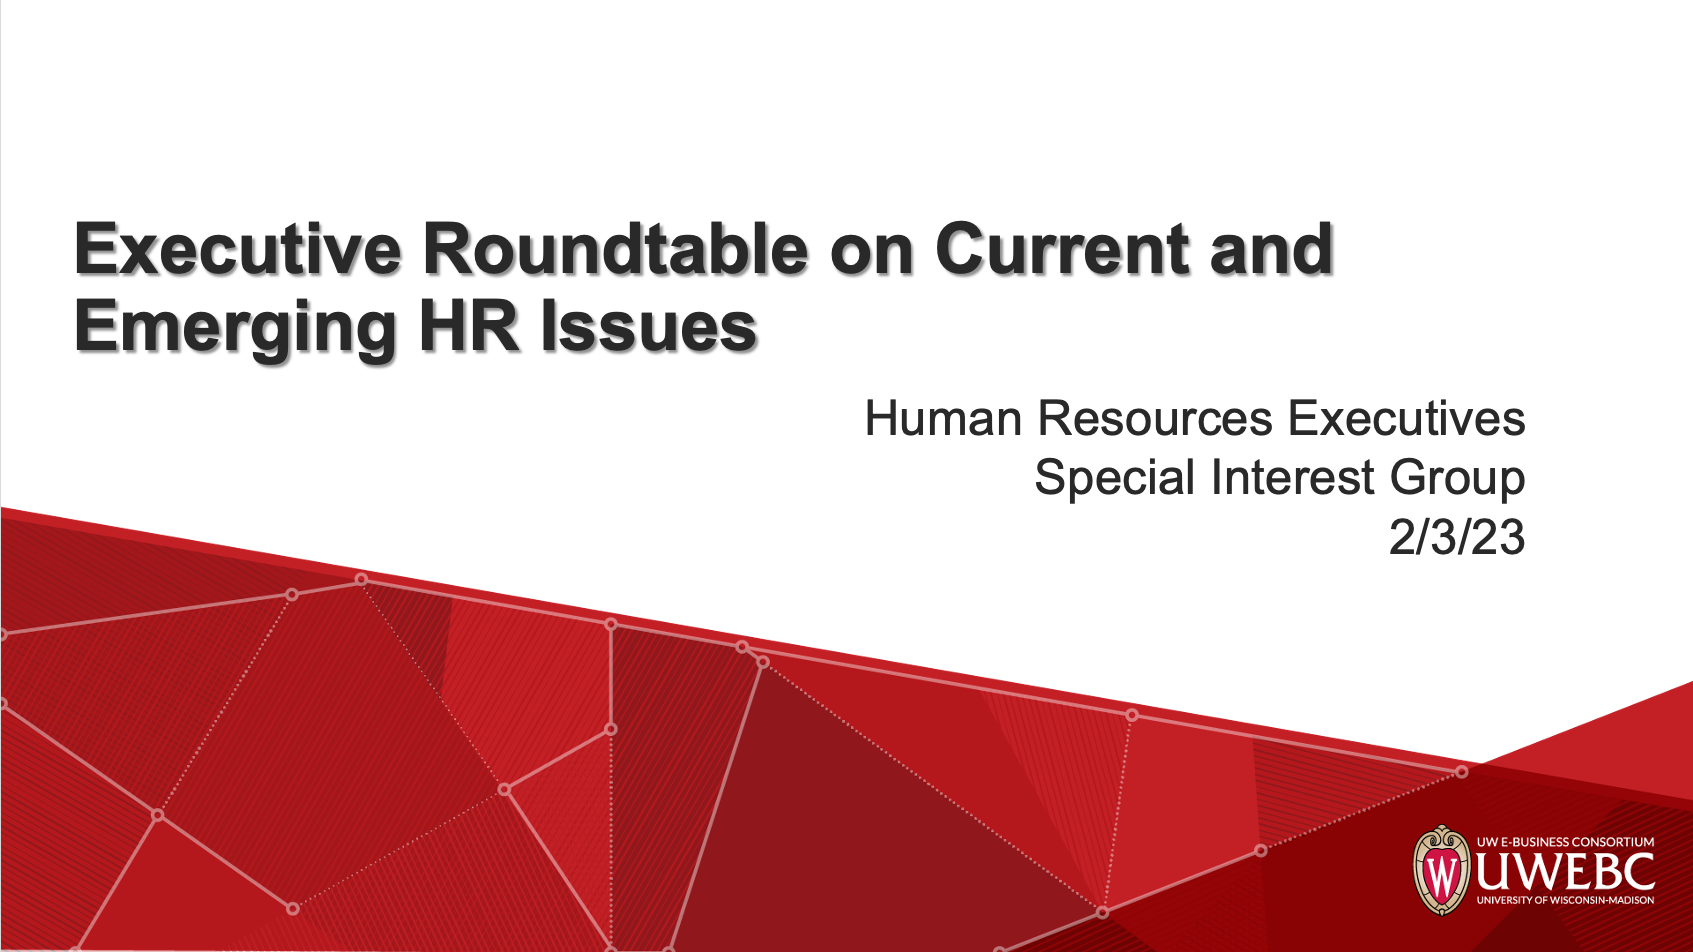 1. UWEBC Presentation: Executive Roundtable on Current and Emerging HR Issues thumbnail